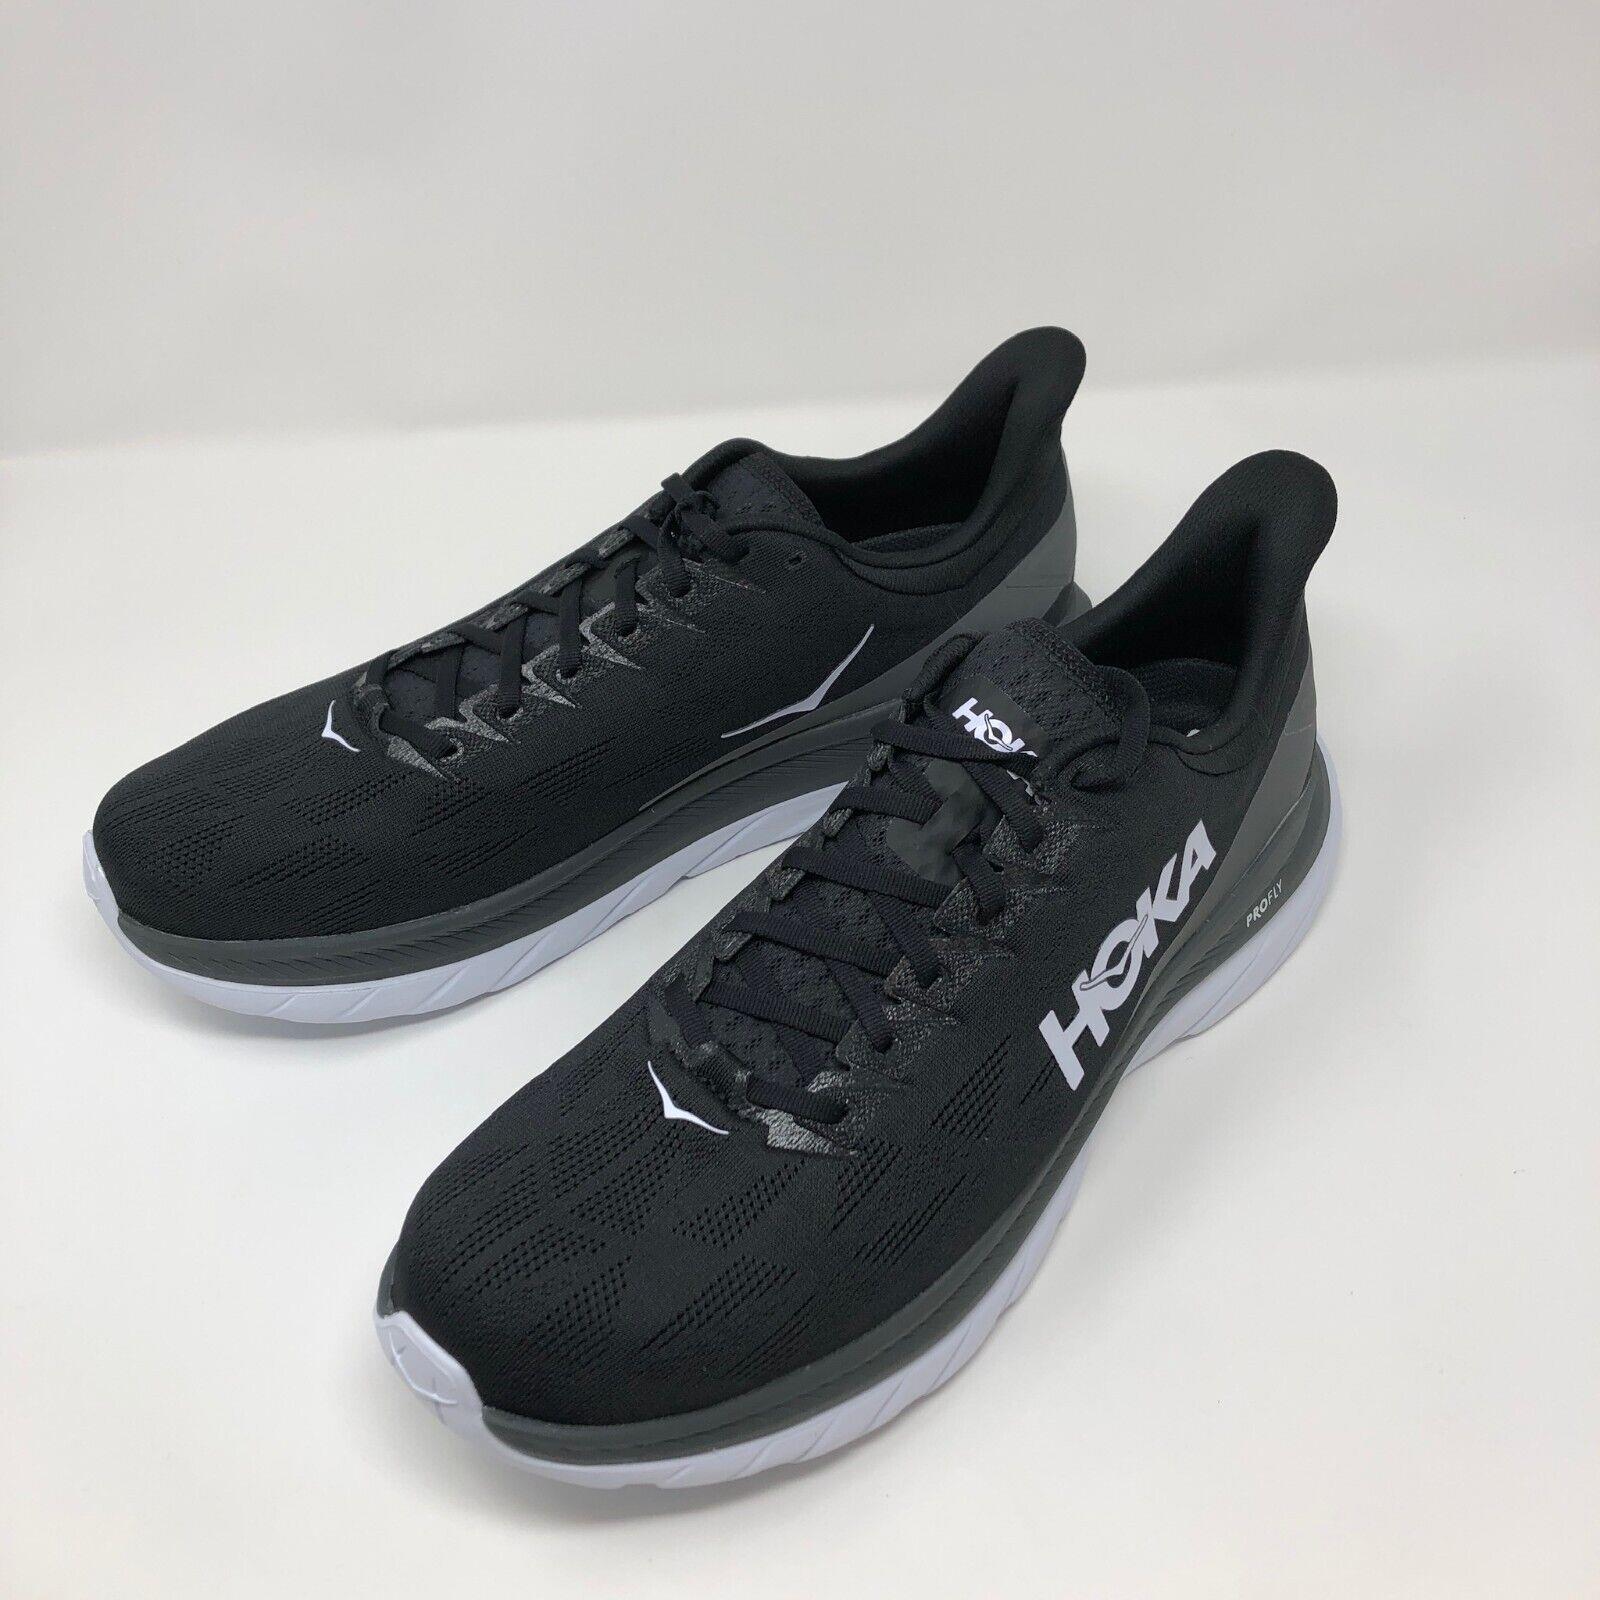 Hoka One Shoes Men`s 14D Mach 4 Running Sneakers Gym Exercise 1113528 Bdsd Black